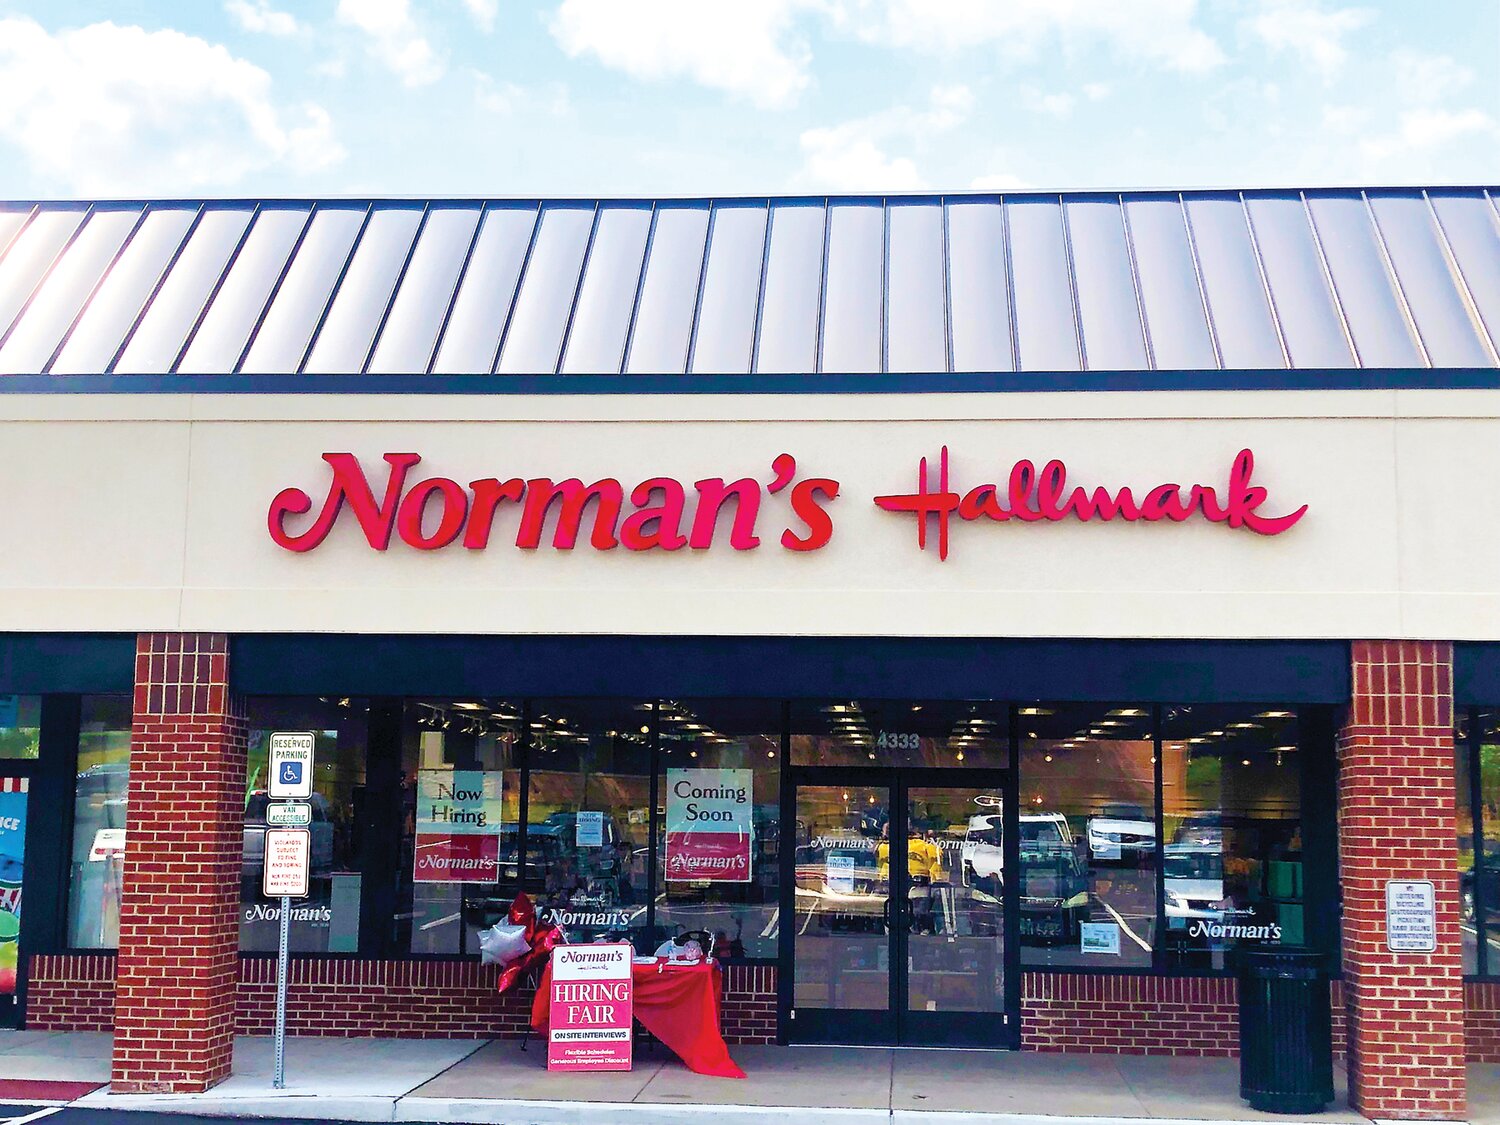 Norman’s Hallmark is now open in the Cross Keys Shopping Center in Plumstead Township, just outside Doylestown.